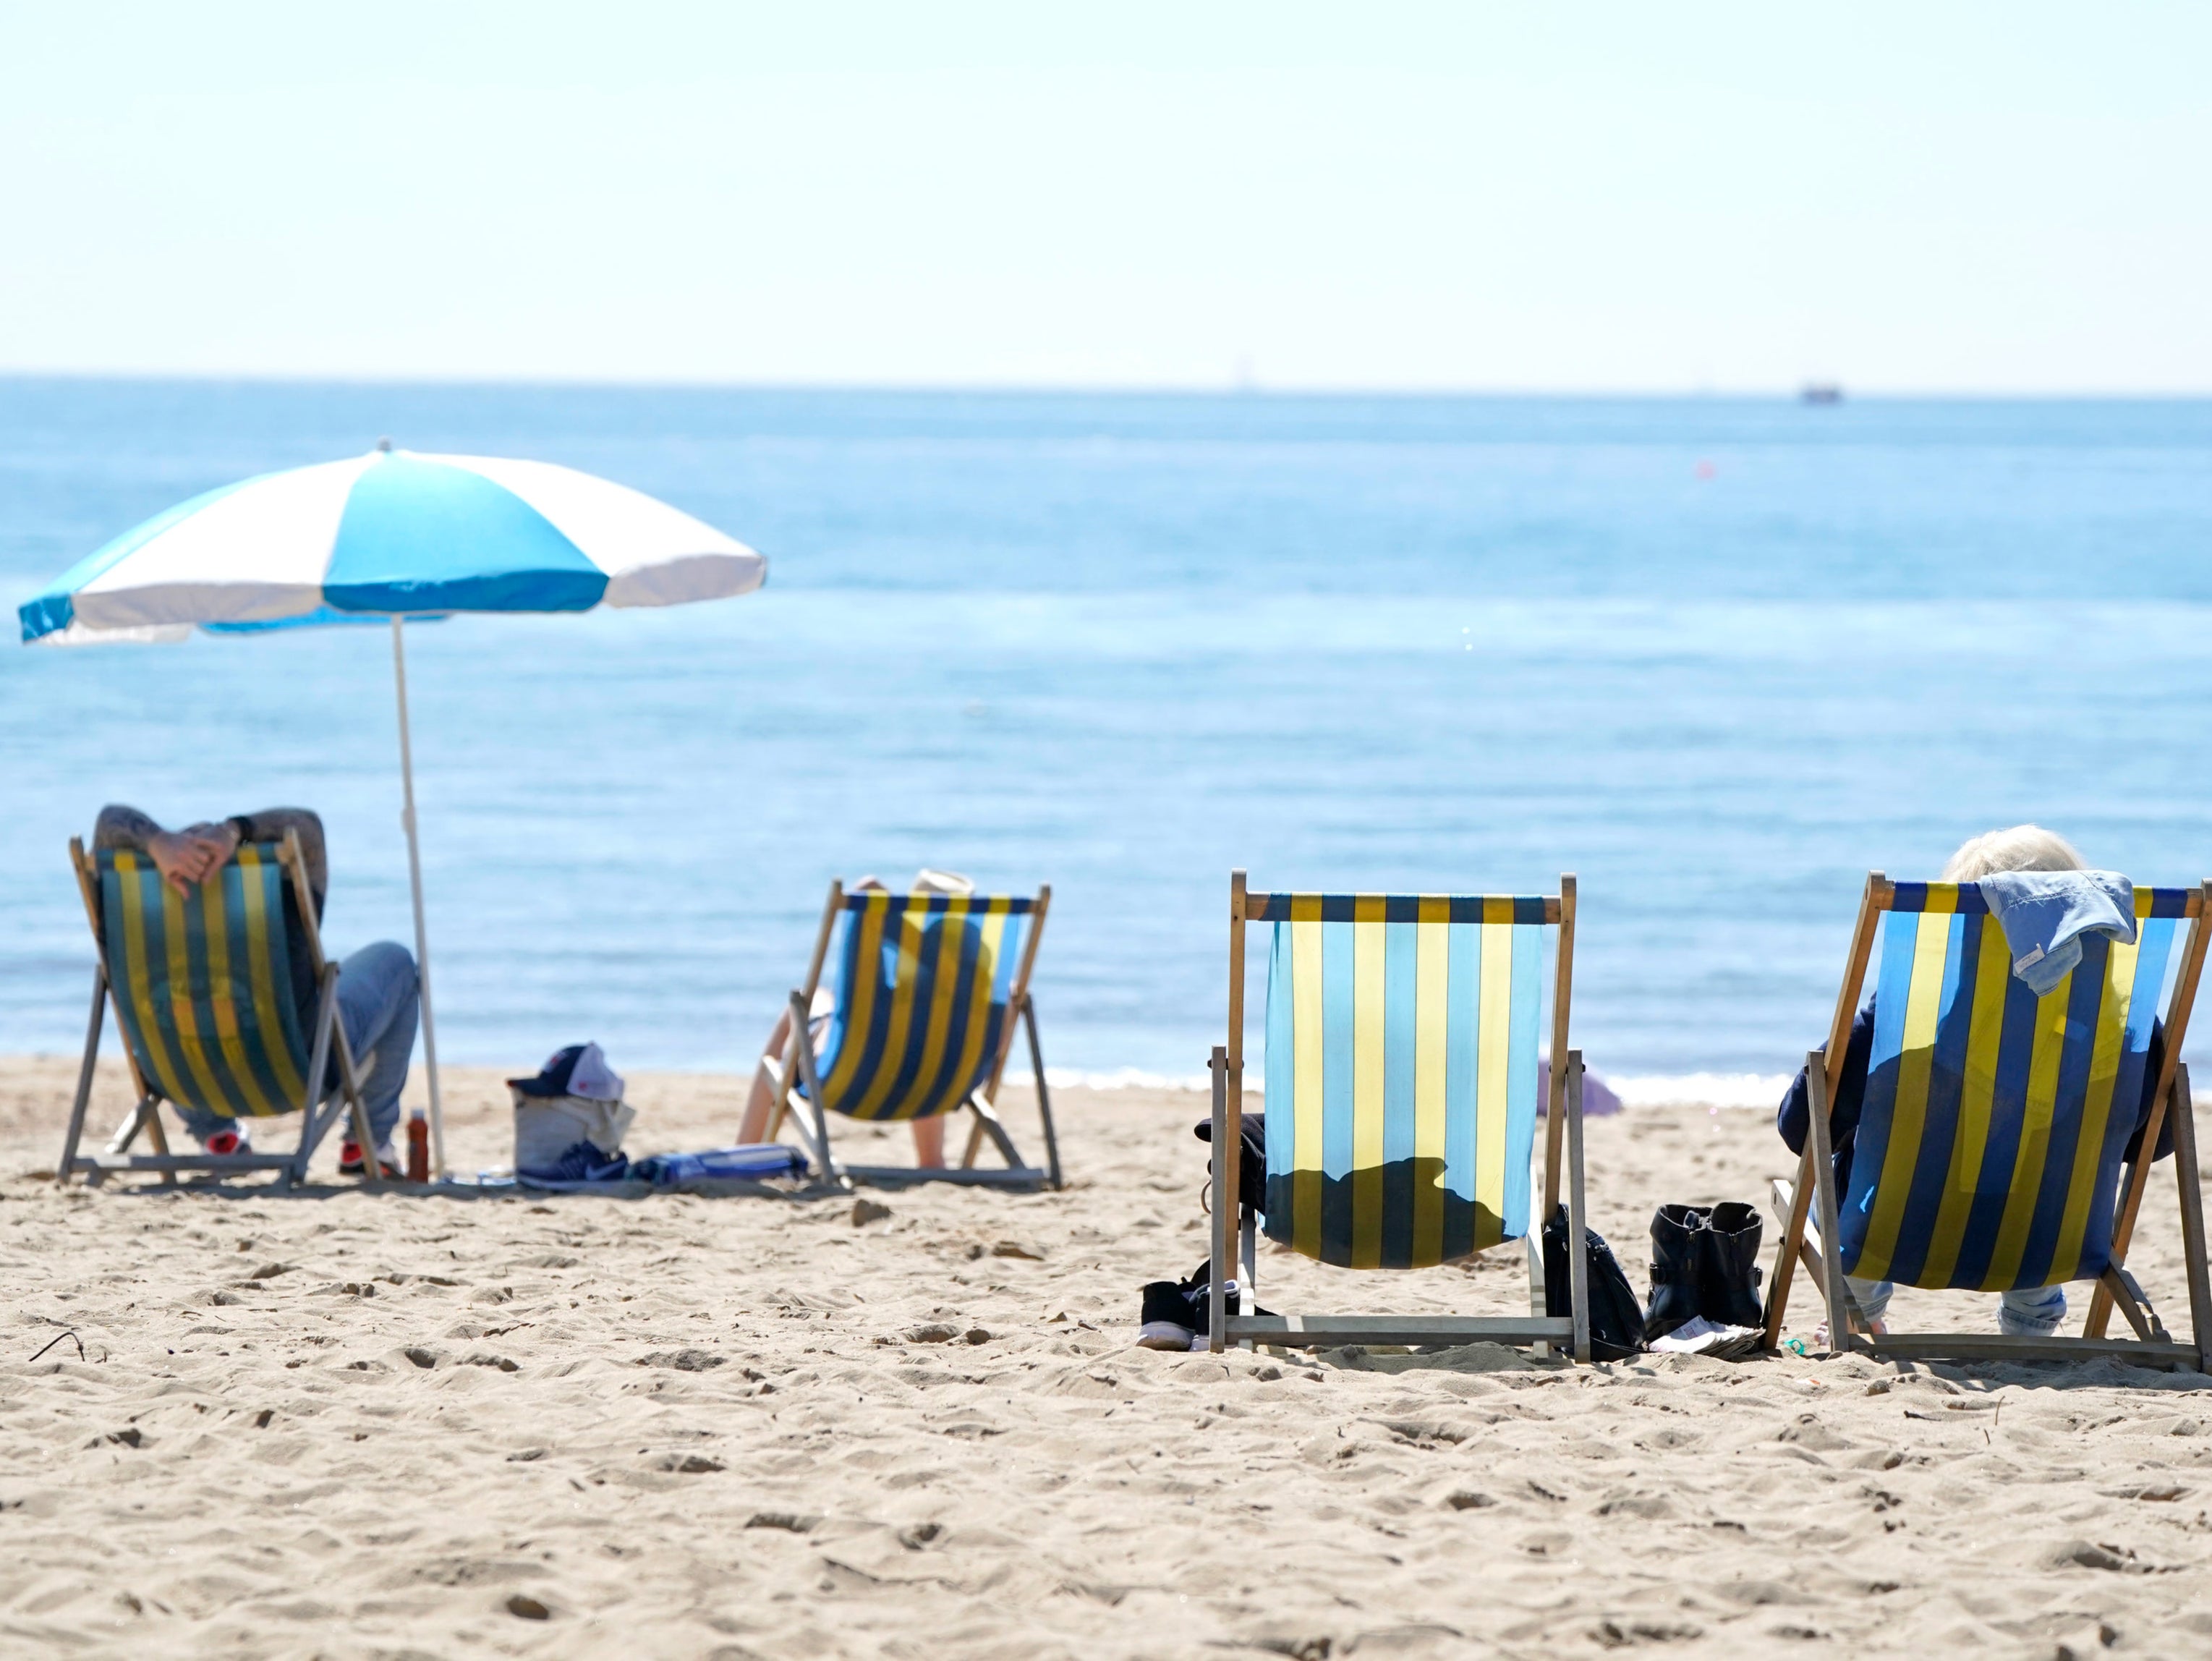 People made the most of Good Friday’s fine weather at Bournemouth